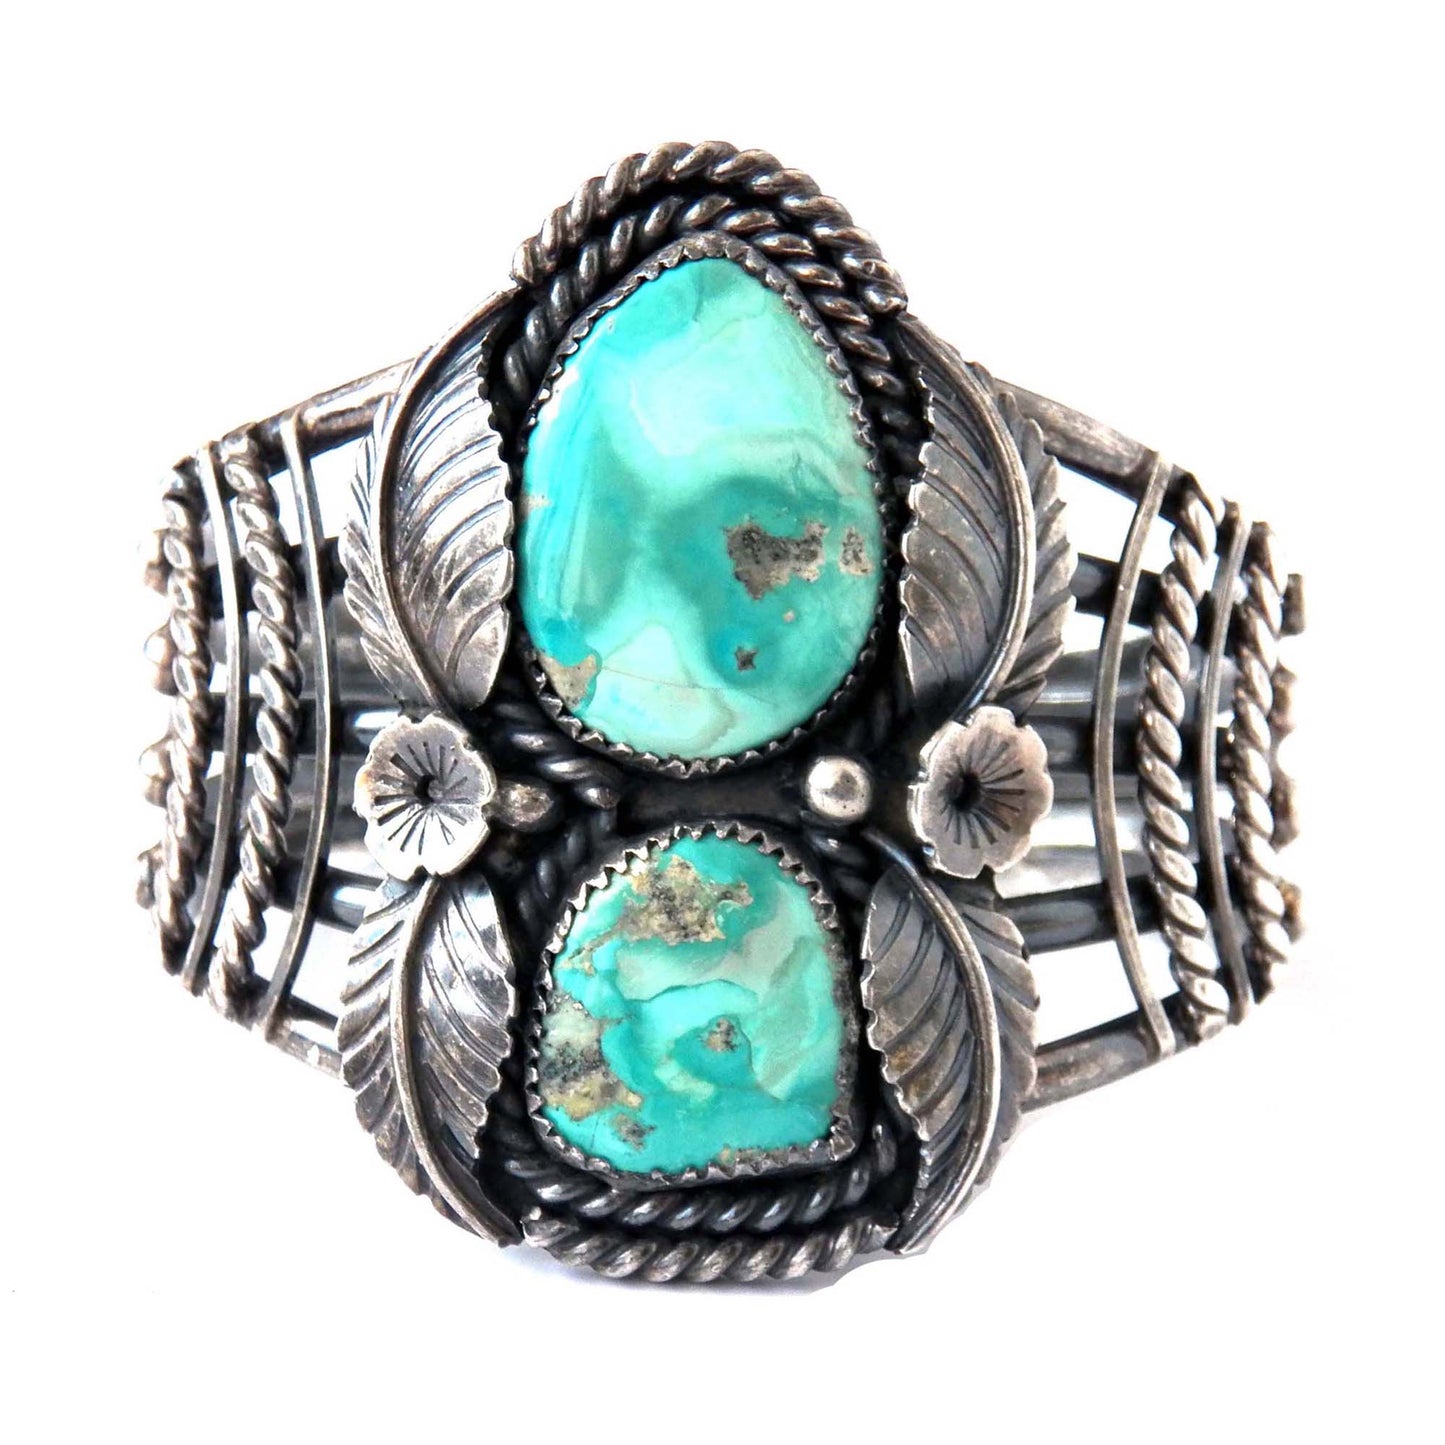 Huge Navajo Turquoise Bangle in Sterling Silver